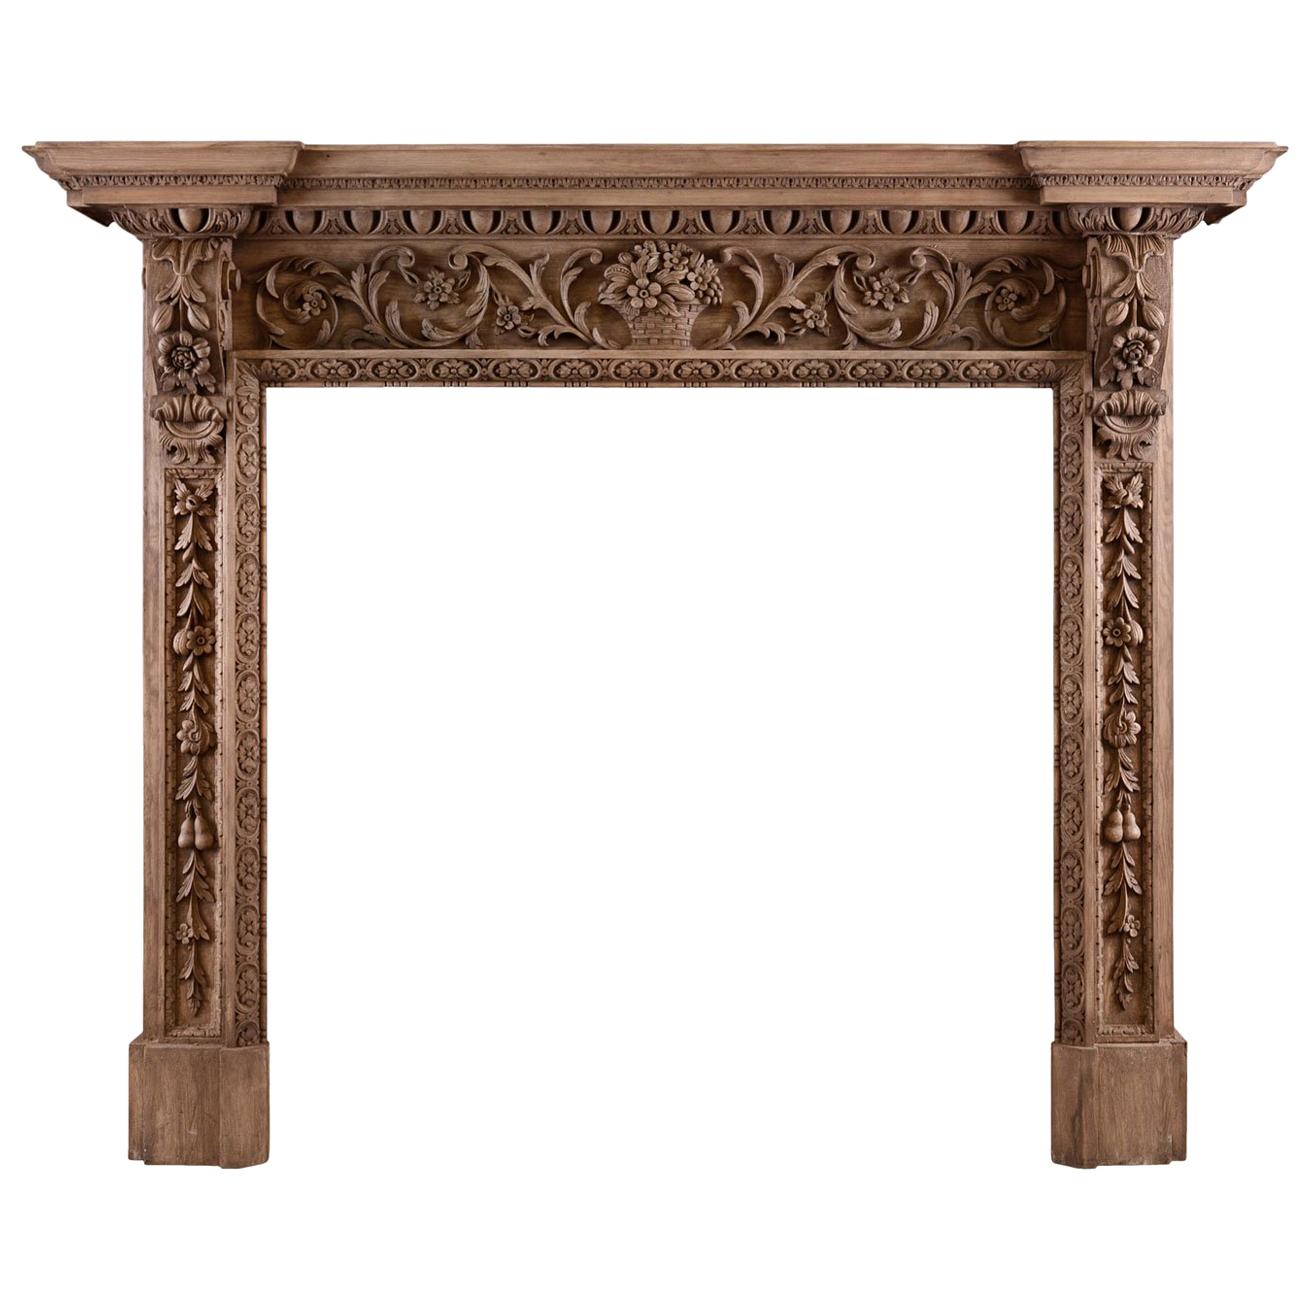 Ornate Pine Fireplace with Carving Throughout For Sale